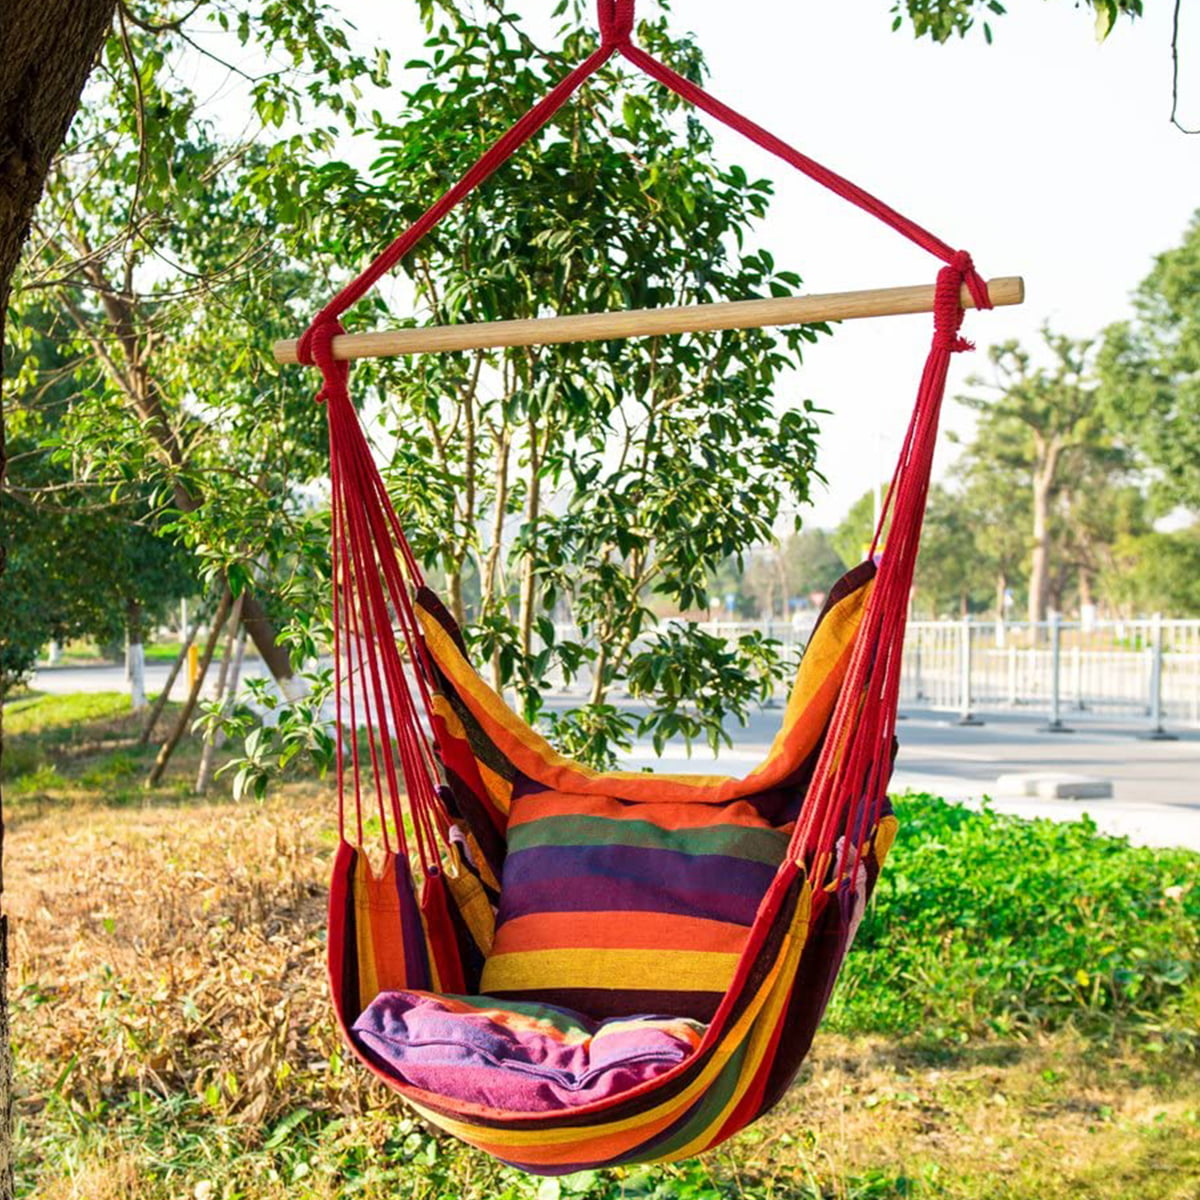 Porch or Backyard Perfect Swing Chair for Patio COMFORTO Hammock Chair Hooks & Tree Strap Outdoor Hanging Chair with 2 Inside Pockets Max Weight of 440 lbs Cushions Includes Transport Bag 